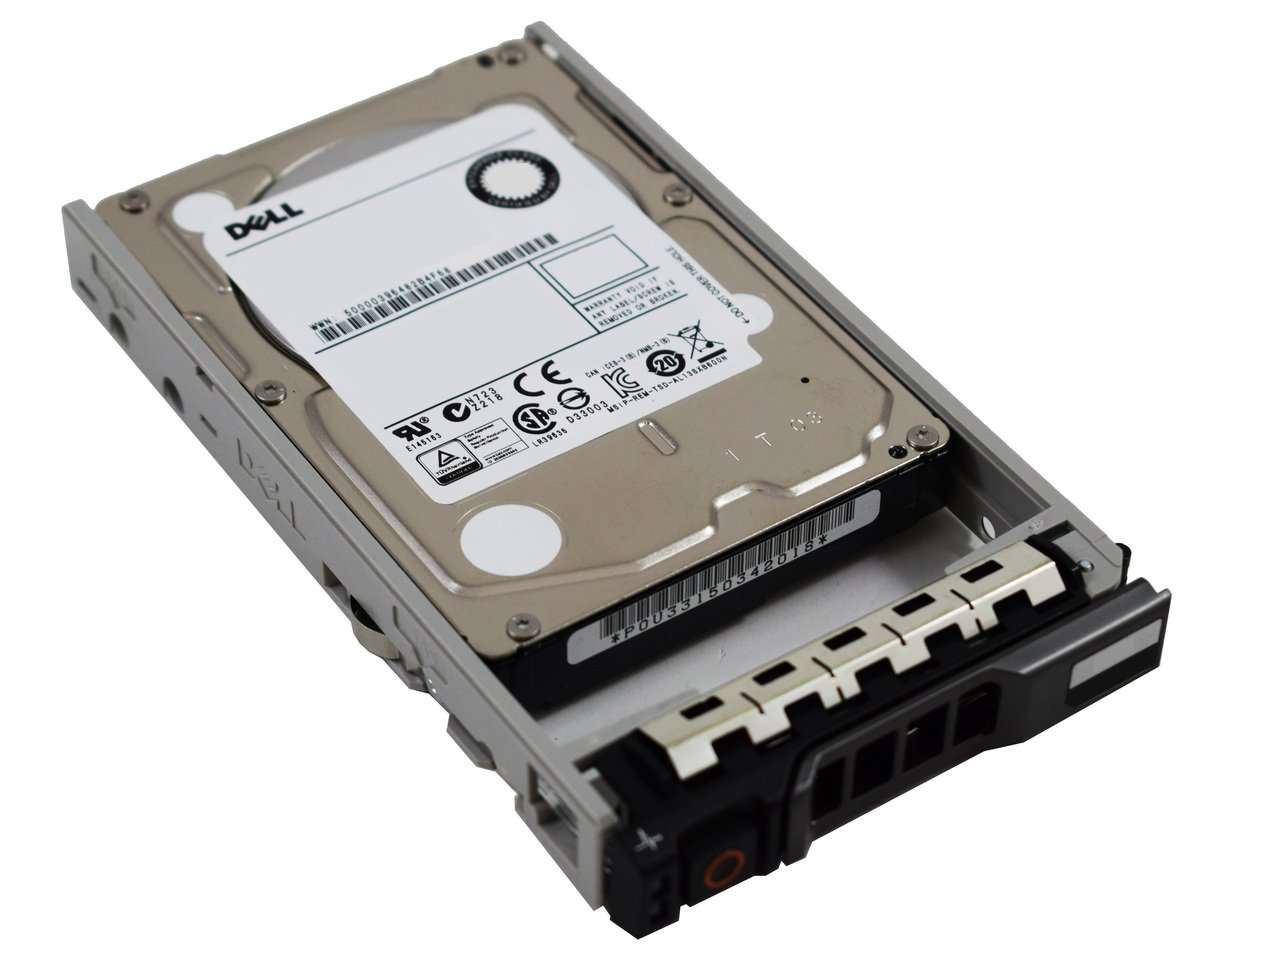 Dell G13 400-ADPI 600GB 15K RPM SAS 6Gb/s 512n 2.5" Manufacturer Recertified HDD